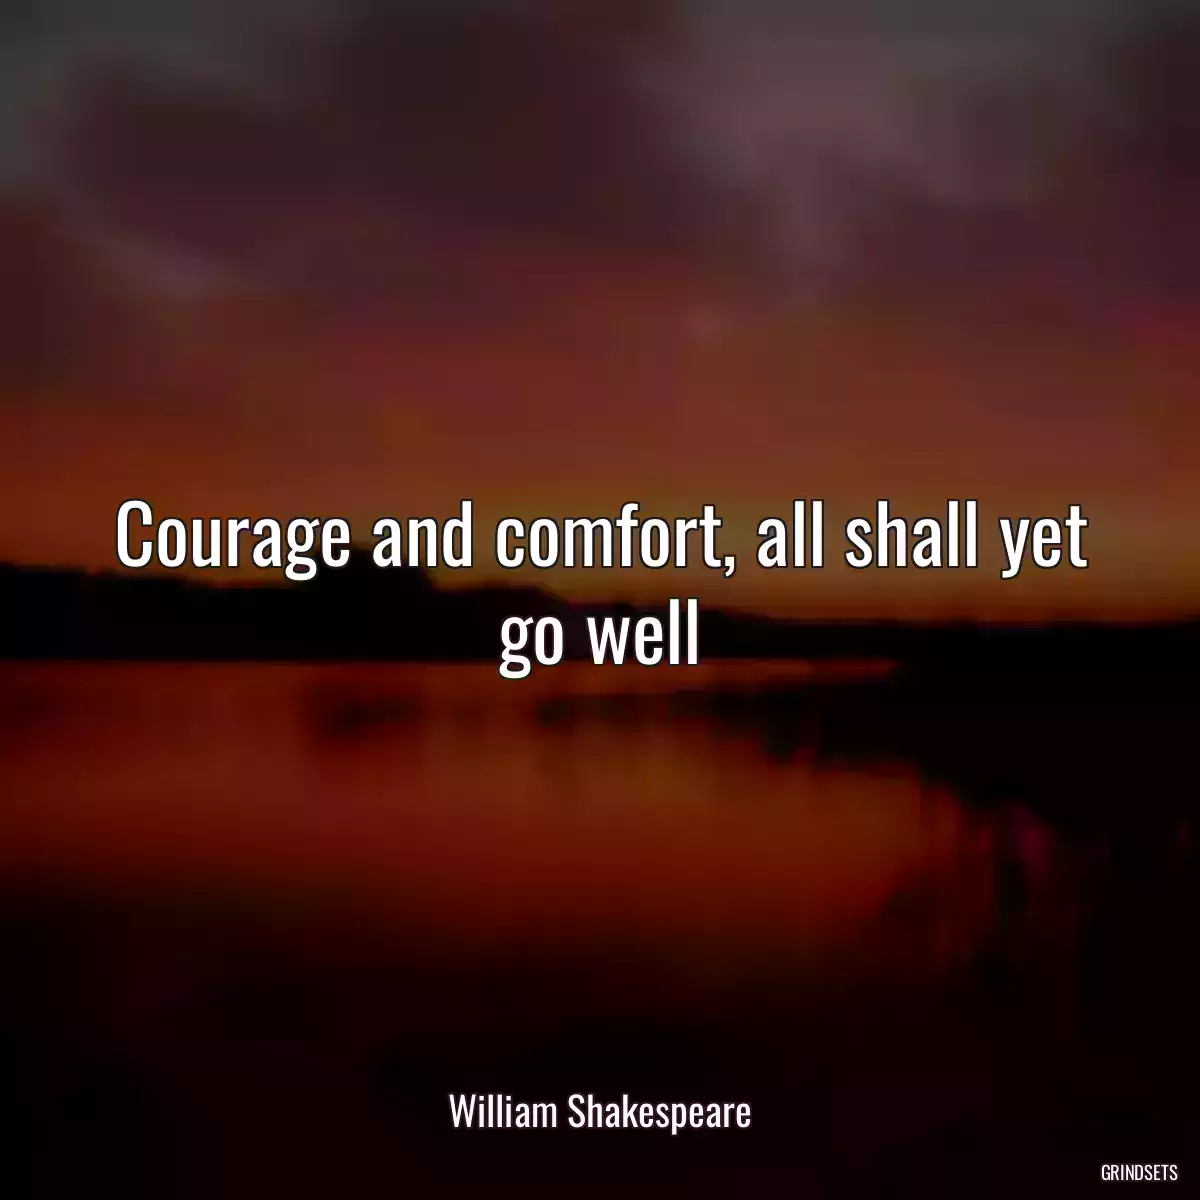 Courage and comfort, all shall yet go well